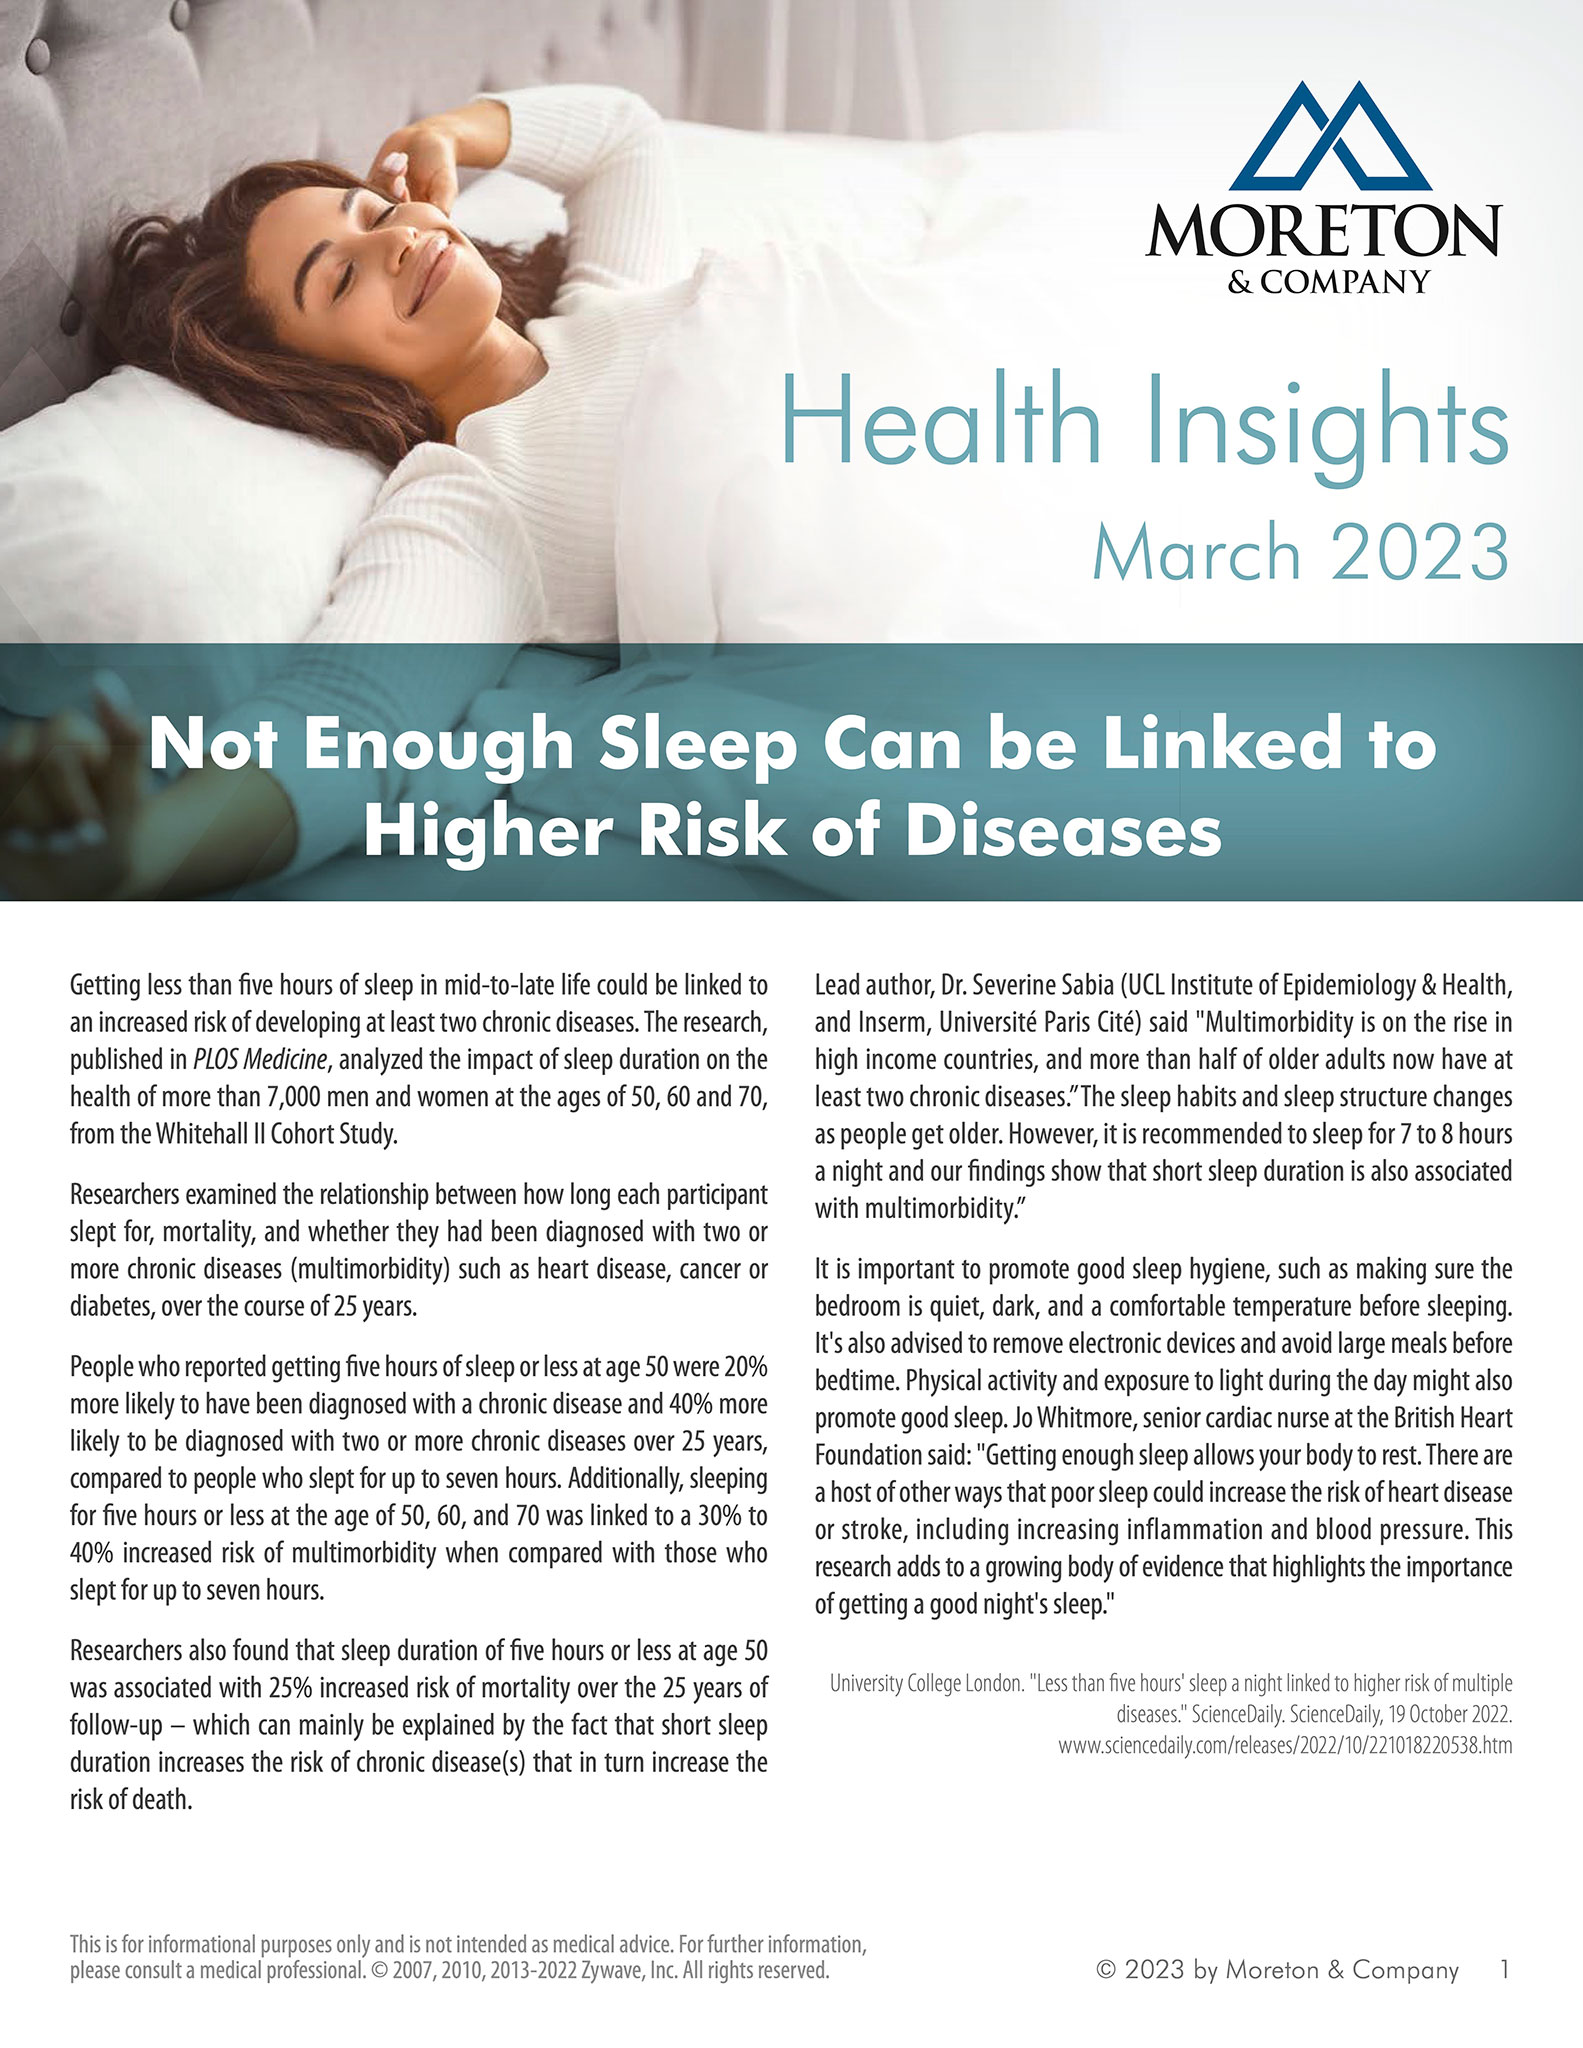 March 2023 Moreton & Company Insights Newsletter